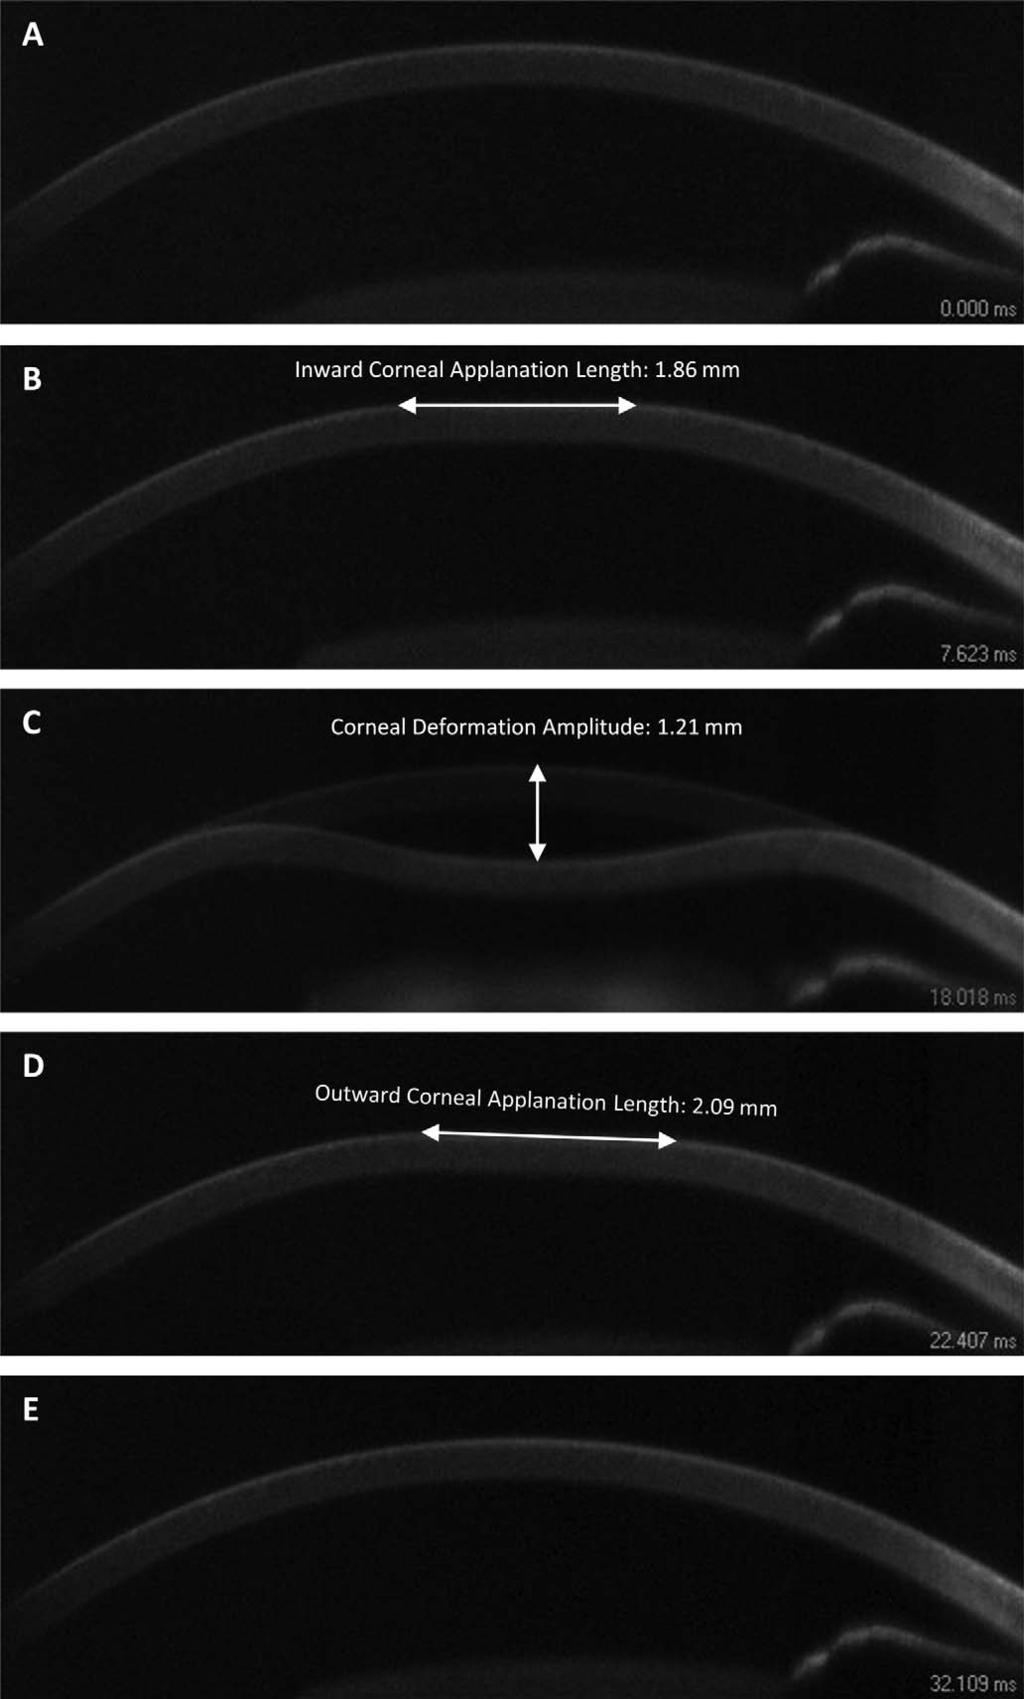 Corneal Deformation Response and IOP Measurement IOVS j April 2013 j Vol. 54 j No. 4 j 2887 FIGURE 1. Serial images of the cornea captured by an ultra-high-speed Scheimpflug camera at 0.000 ms (A), 7.